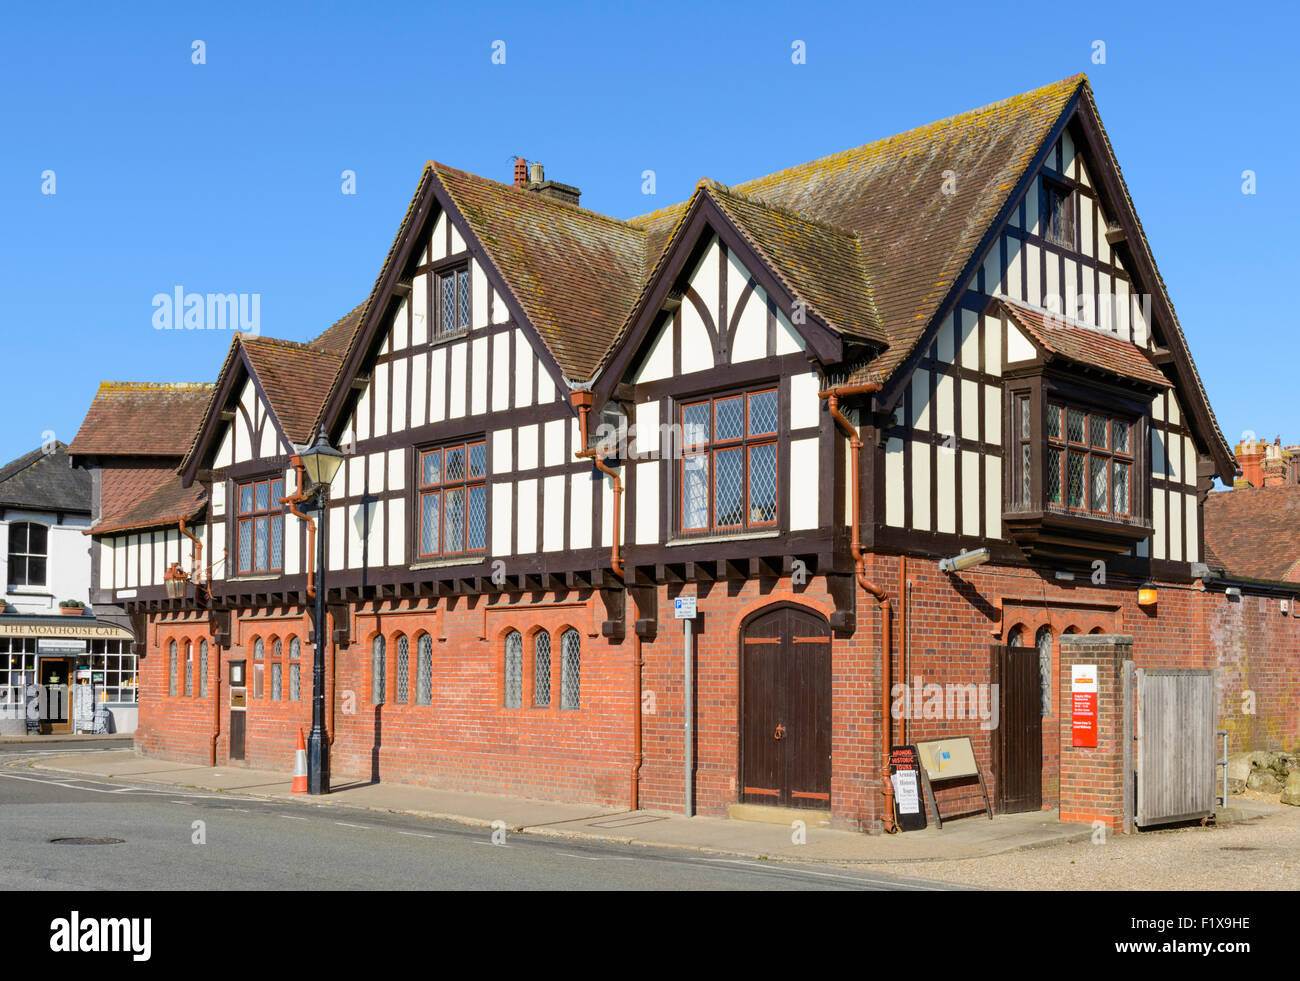 The Post Office, a Mock Tudor style building in the historic market town of Arundel in West Sussex, England, UK. Stock Photo